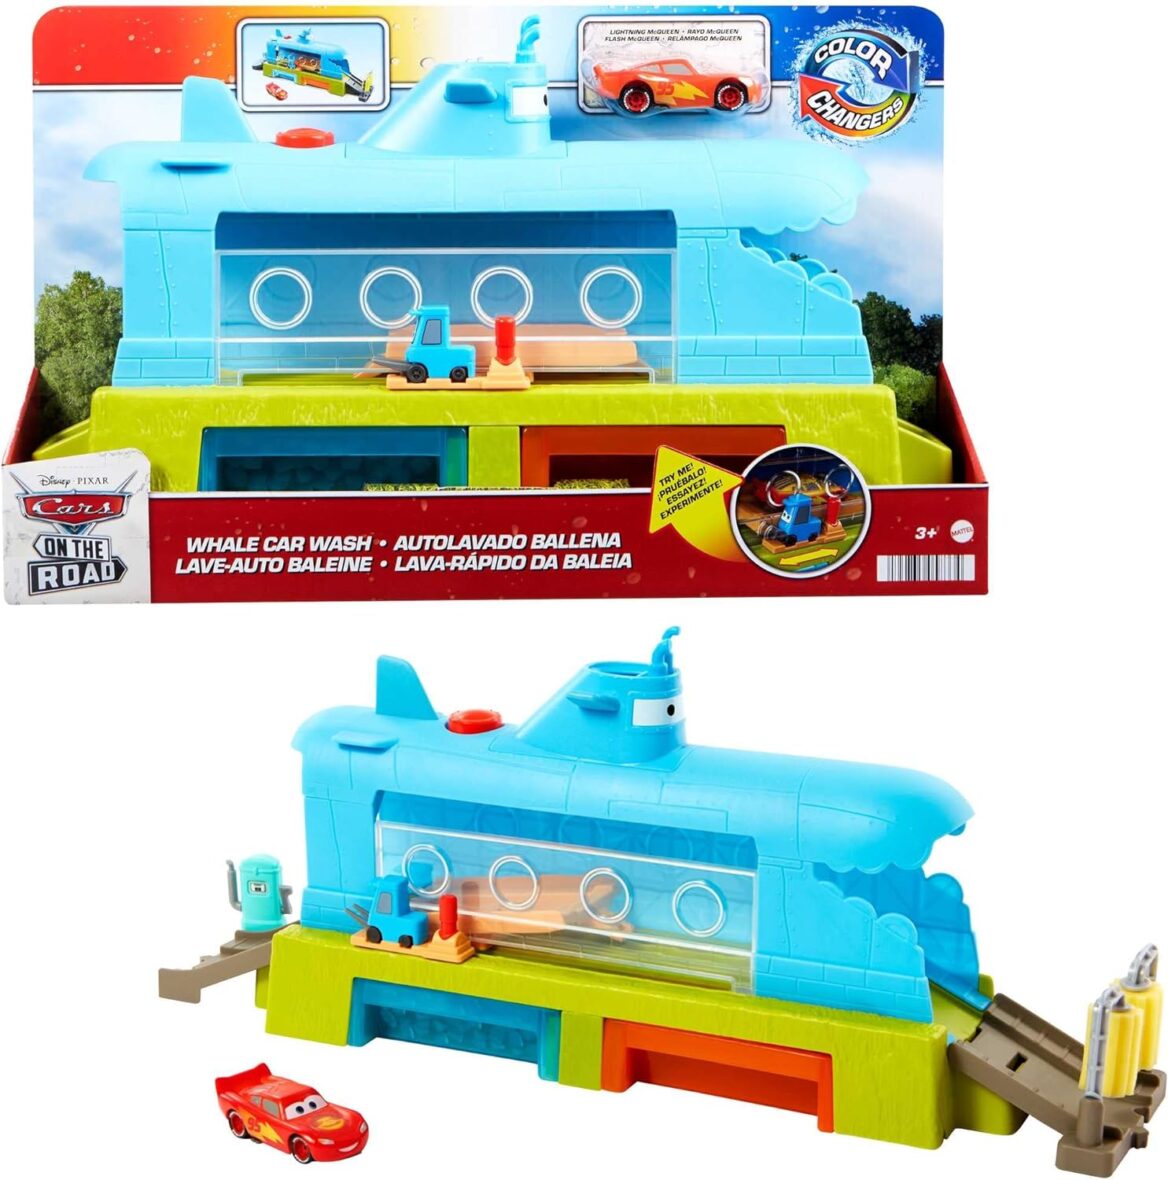 Disney and Pixar Cars Toys, Submarine Car Wash Playset with Color-Change Lightning McQueen Toy Car, Water Play